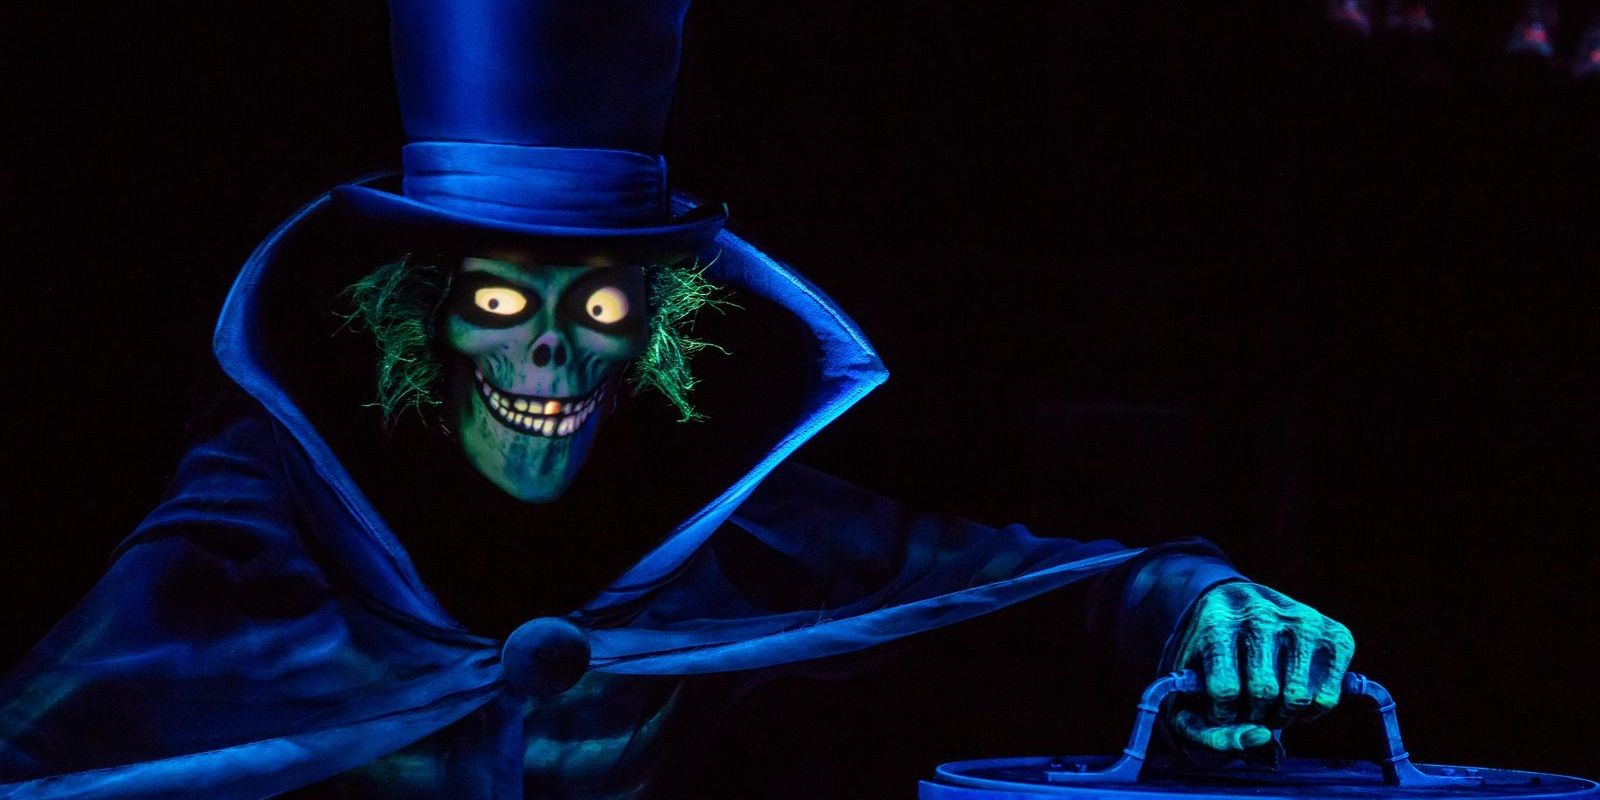 The Hatbox Ghost in The Haunted Mansion Looking Creepy.